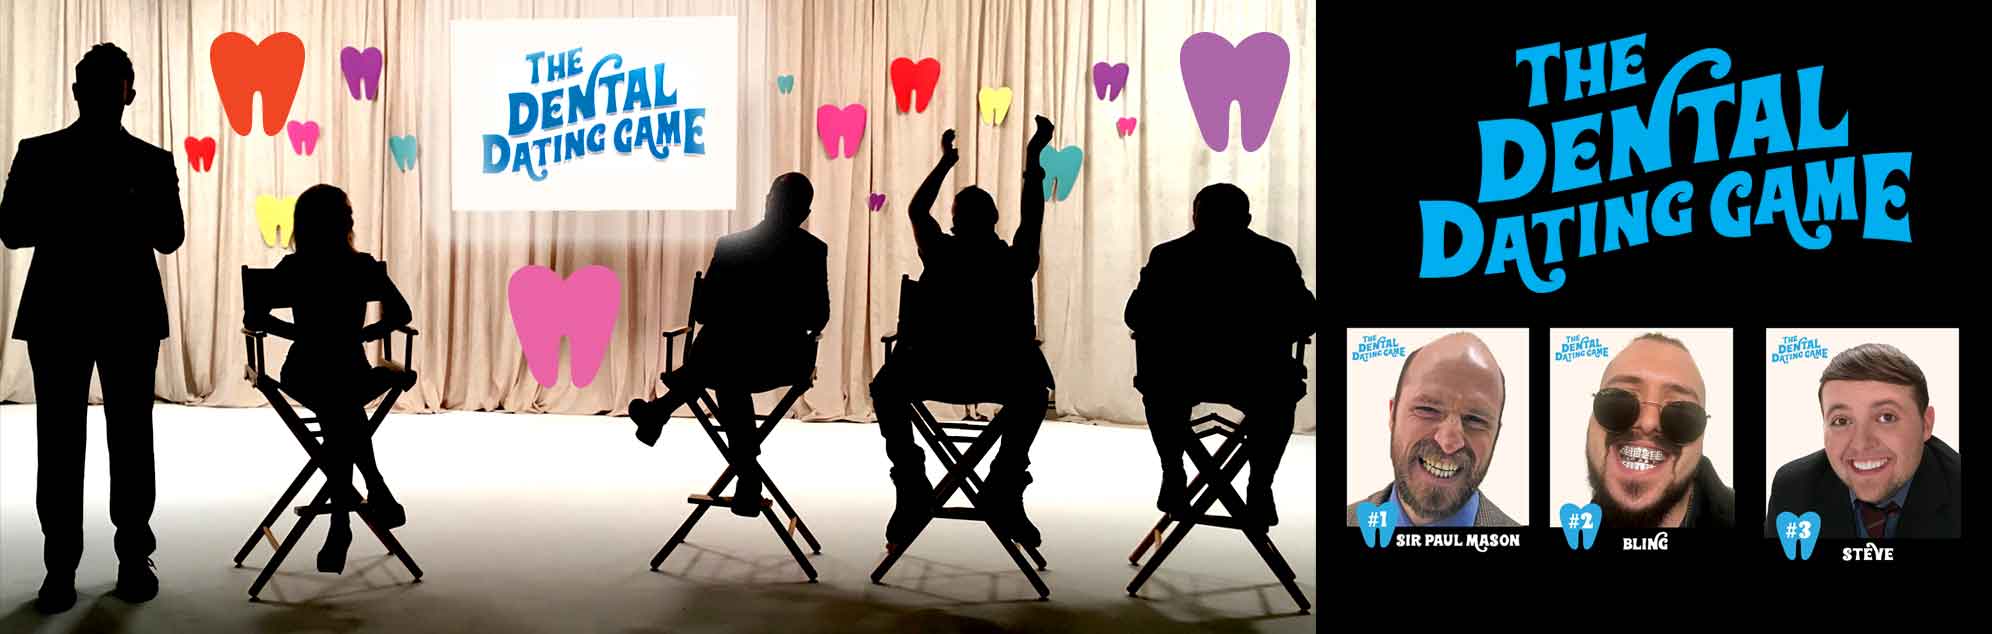 “THE DENTAL DATING GAME” TV Commercial is Live!